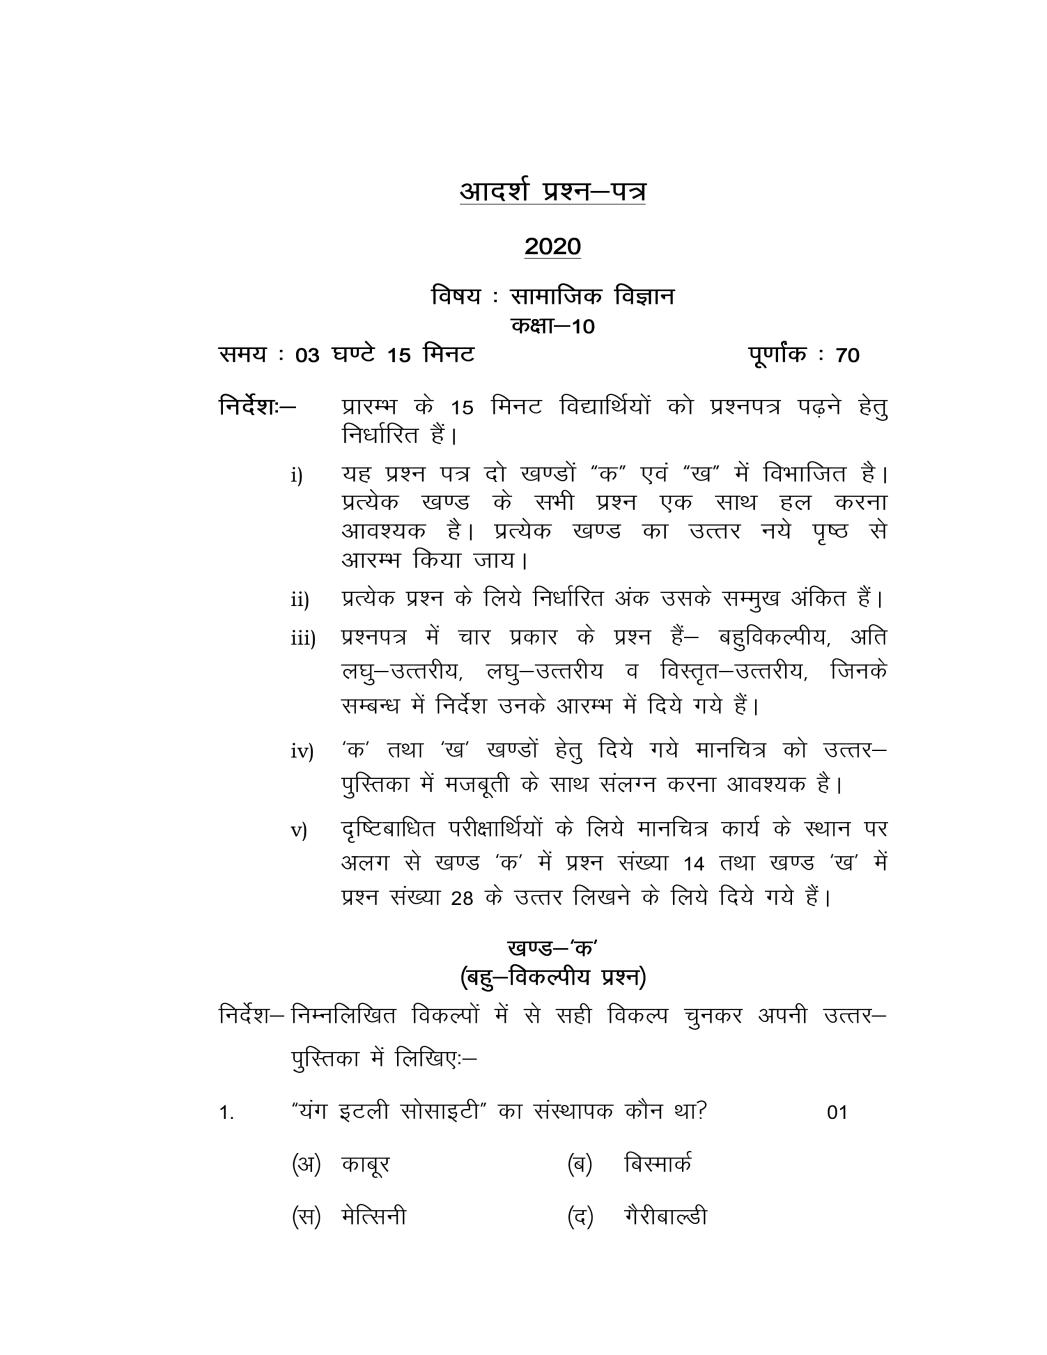 UP Board Class 10 Model Question Paper 2020 Social Science - Page 1